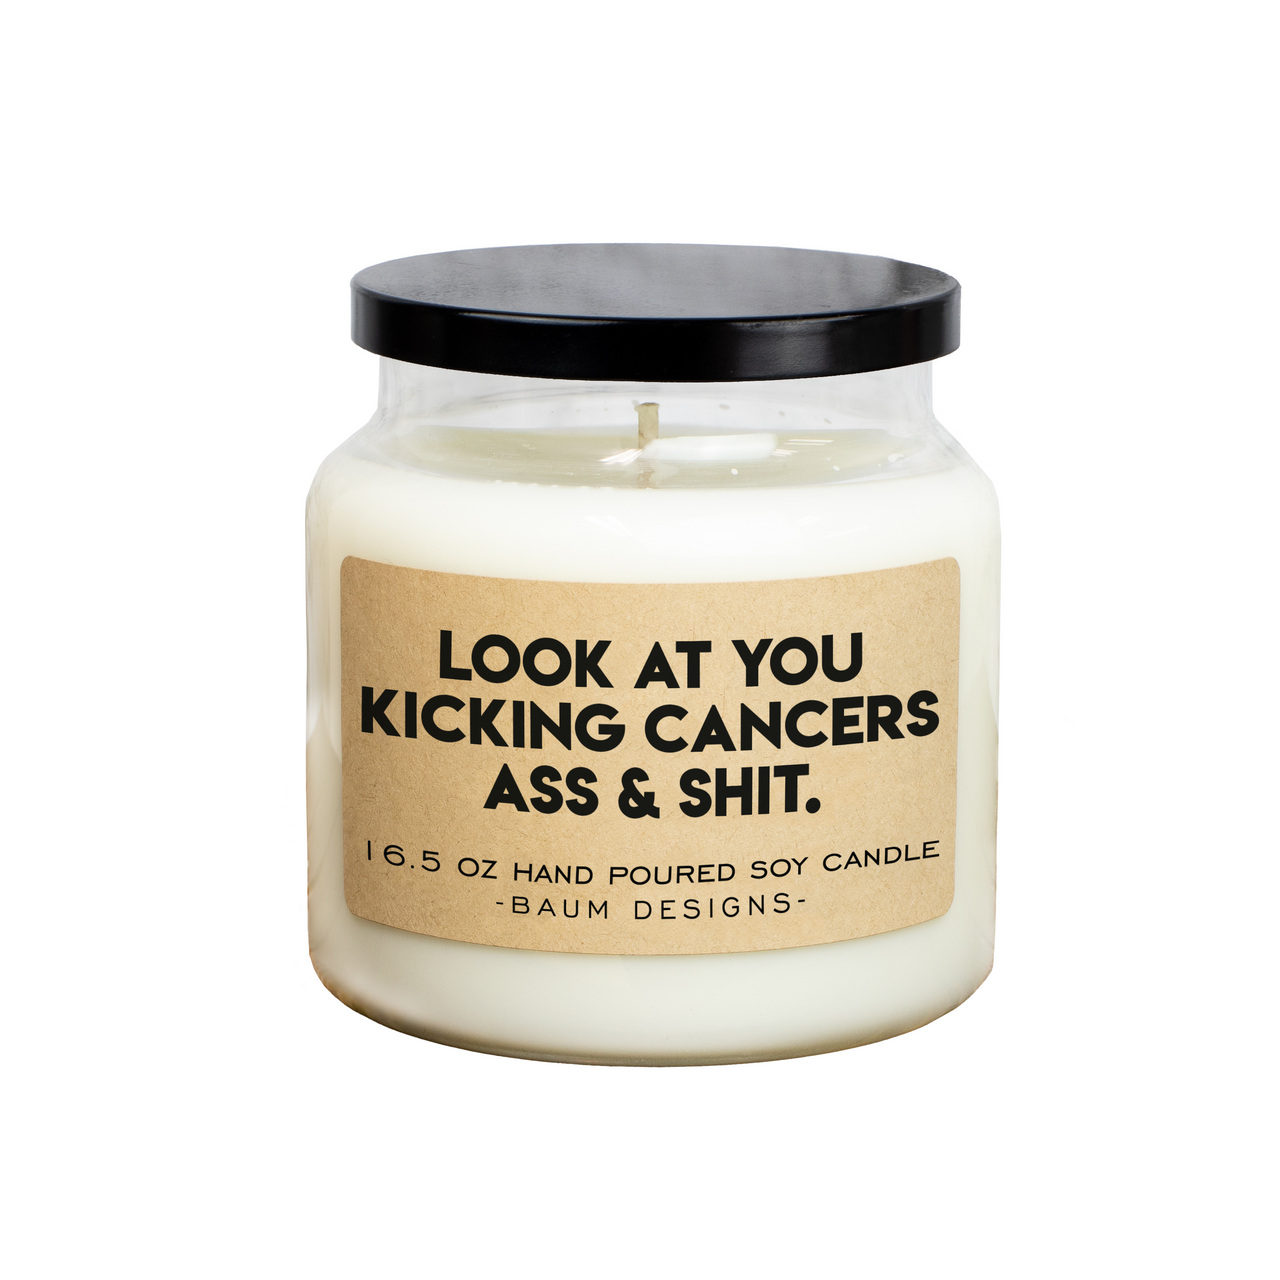 Look At You Kicking Cancers Ass & Shit Soy Candle Baum Designs